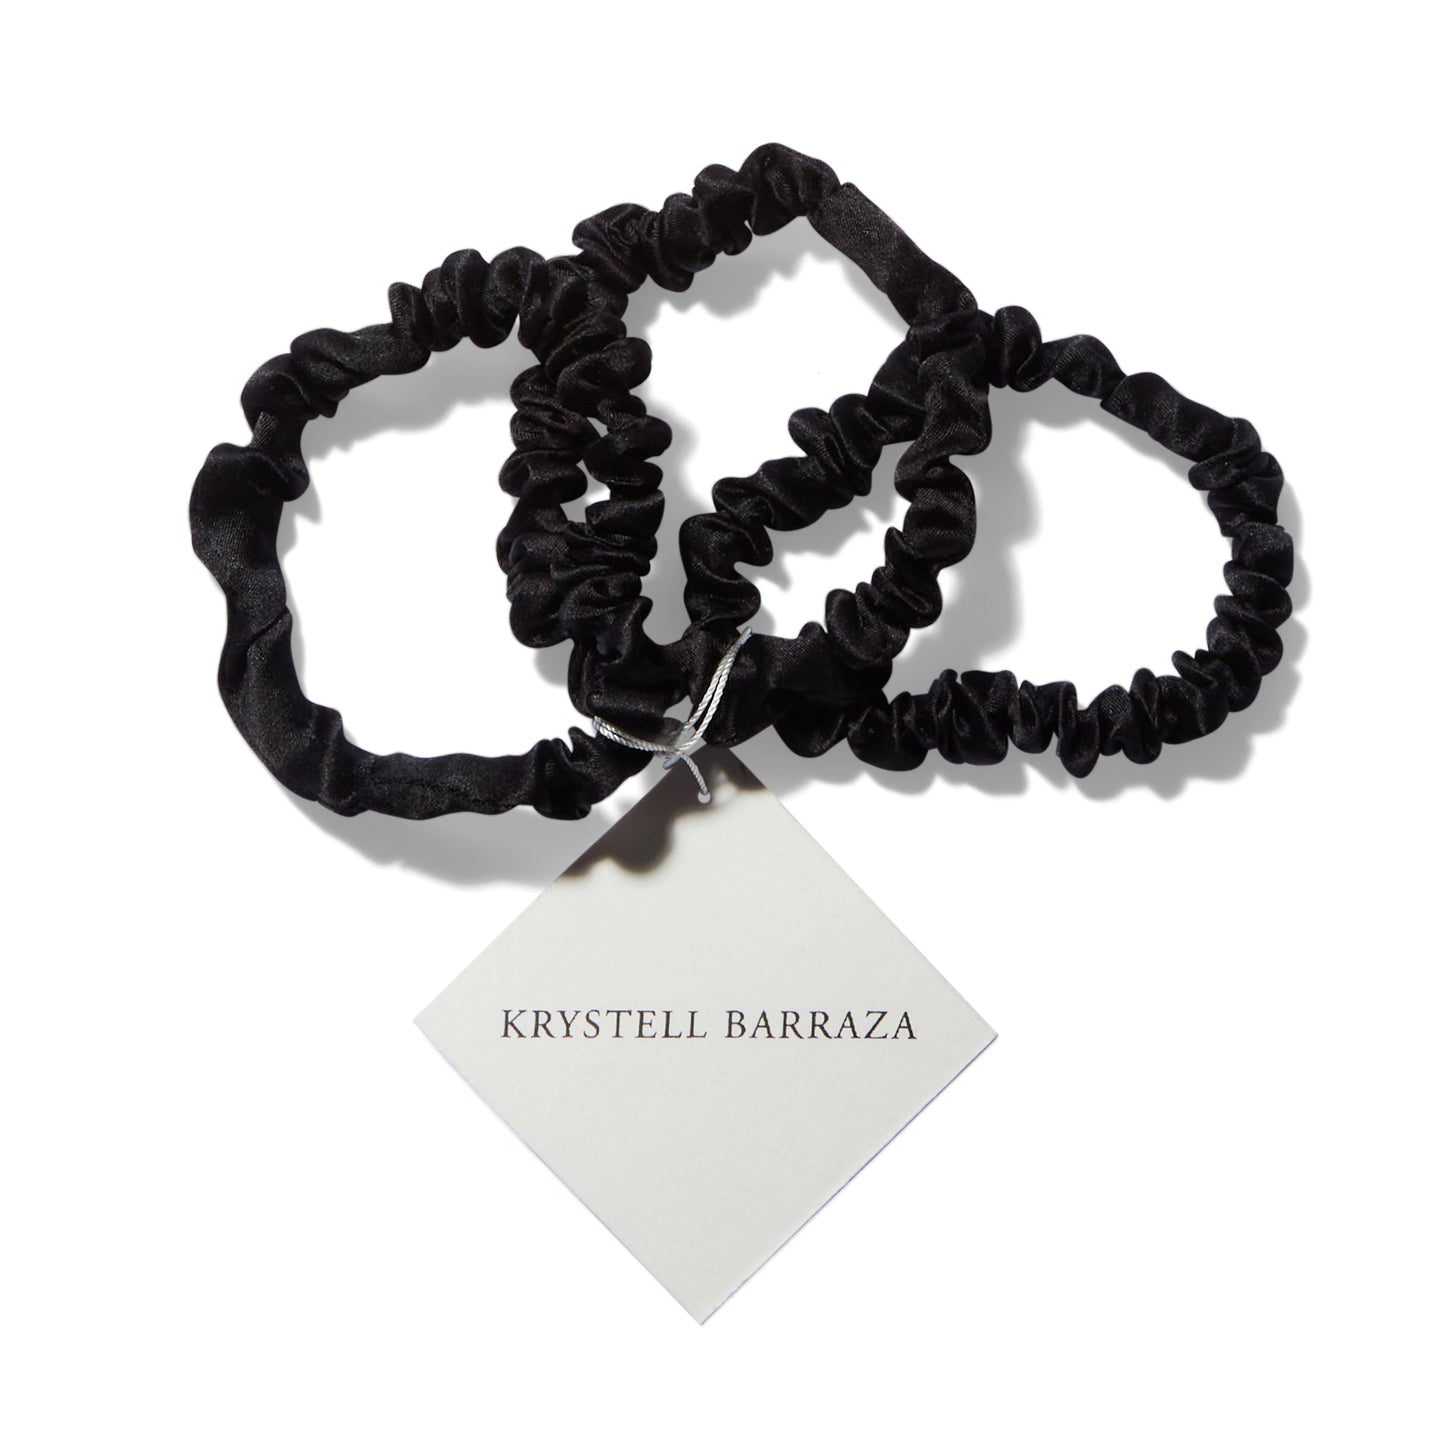 Three 6 Krystell Barraza silk hair ties in Onyx with the logo tag attached. 